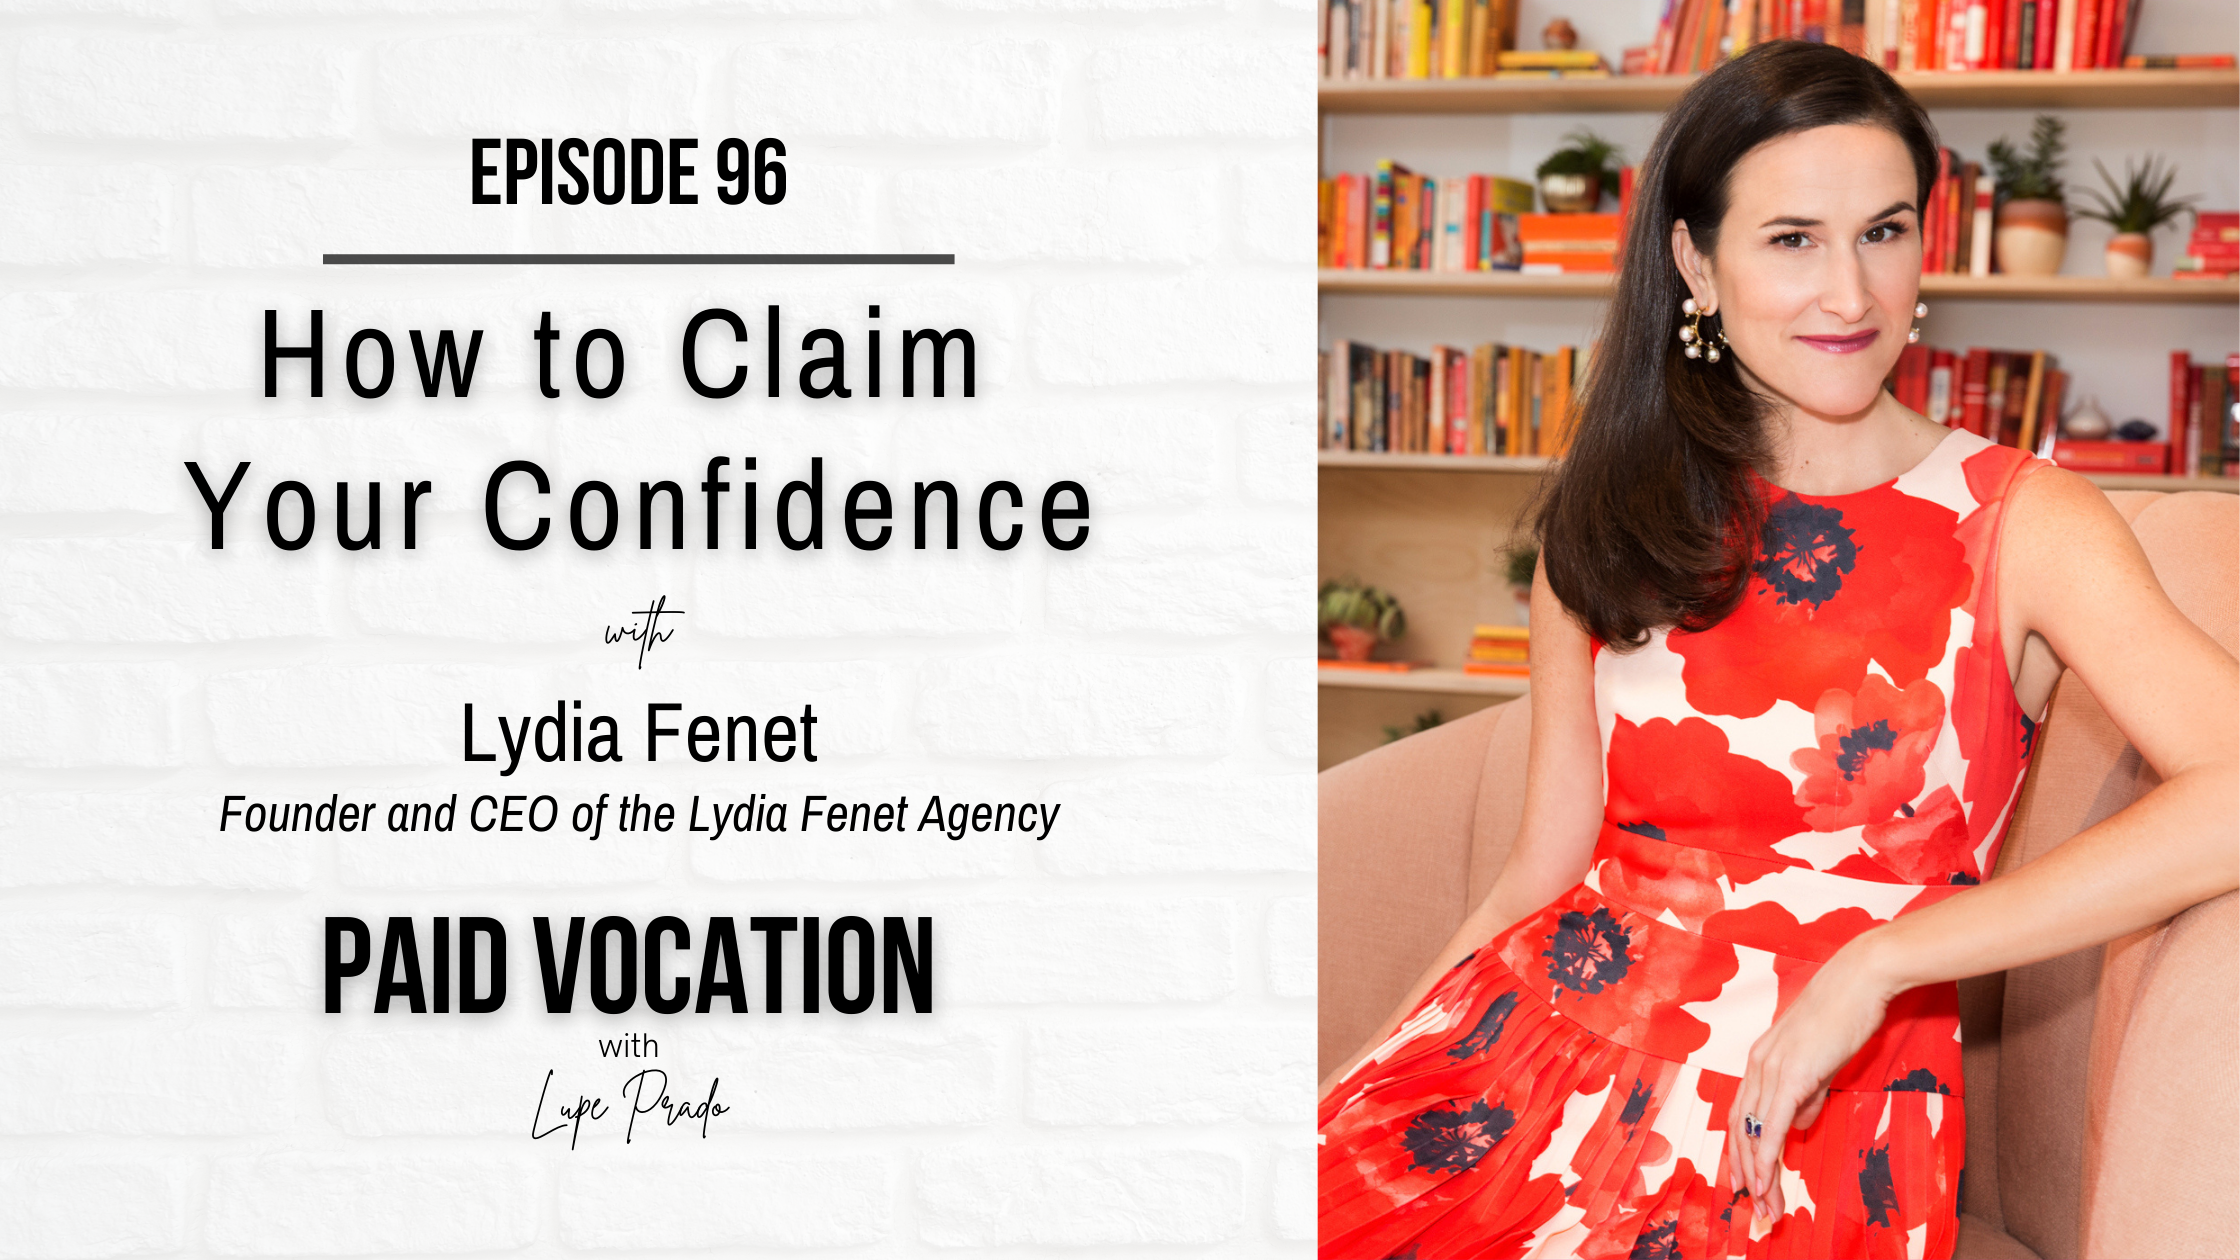 How to Claim Your Confidence with Lydia Fenet